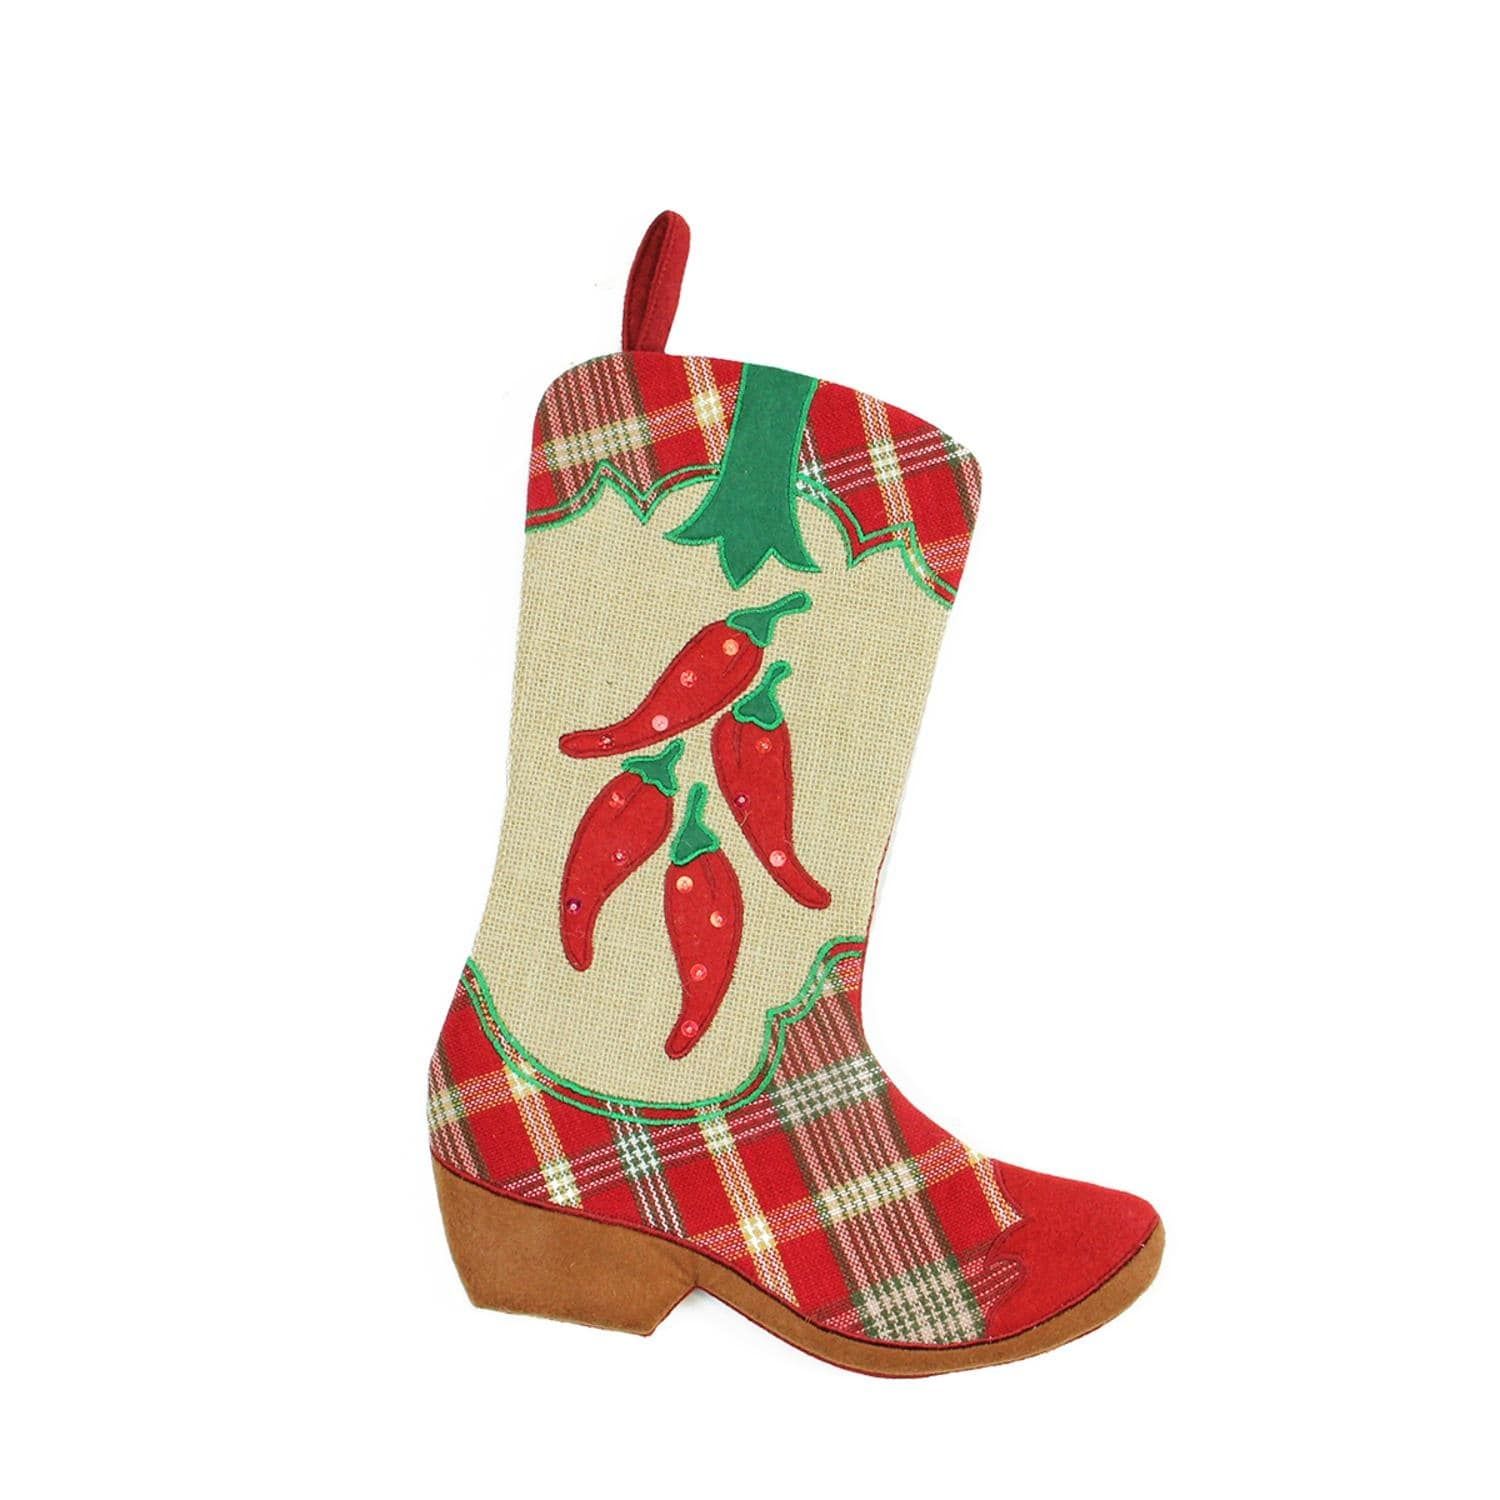 18.5 Wild West Embroidered Chili Peppers Red Plaid and Brown Burlap ...